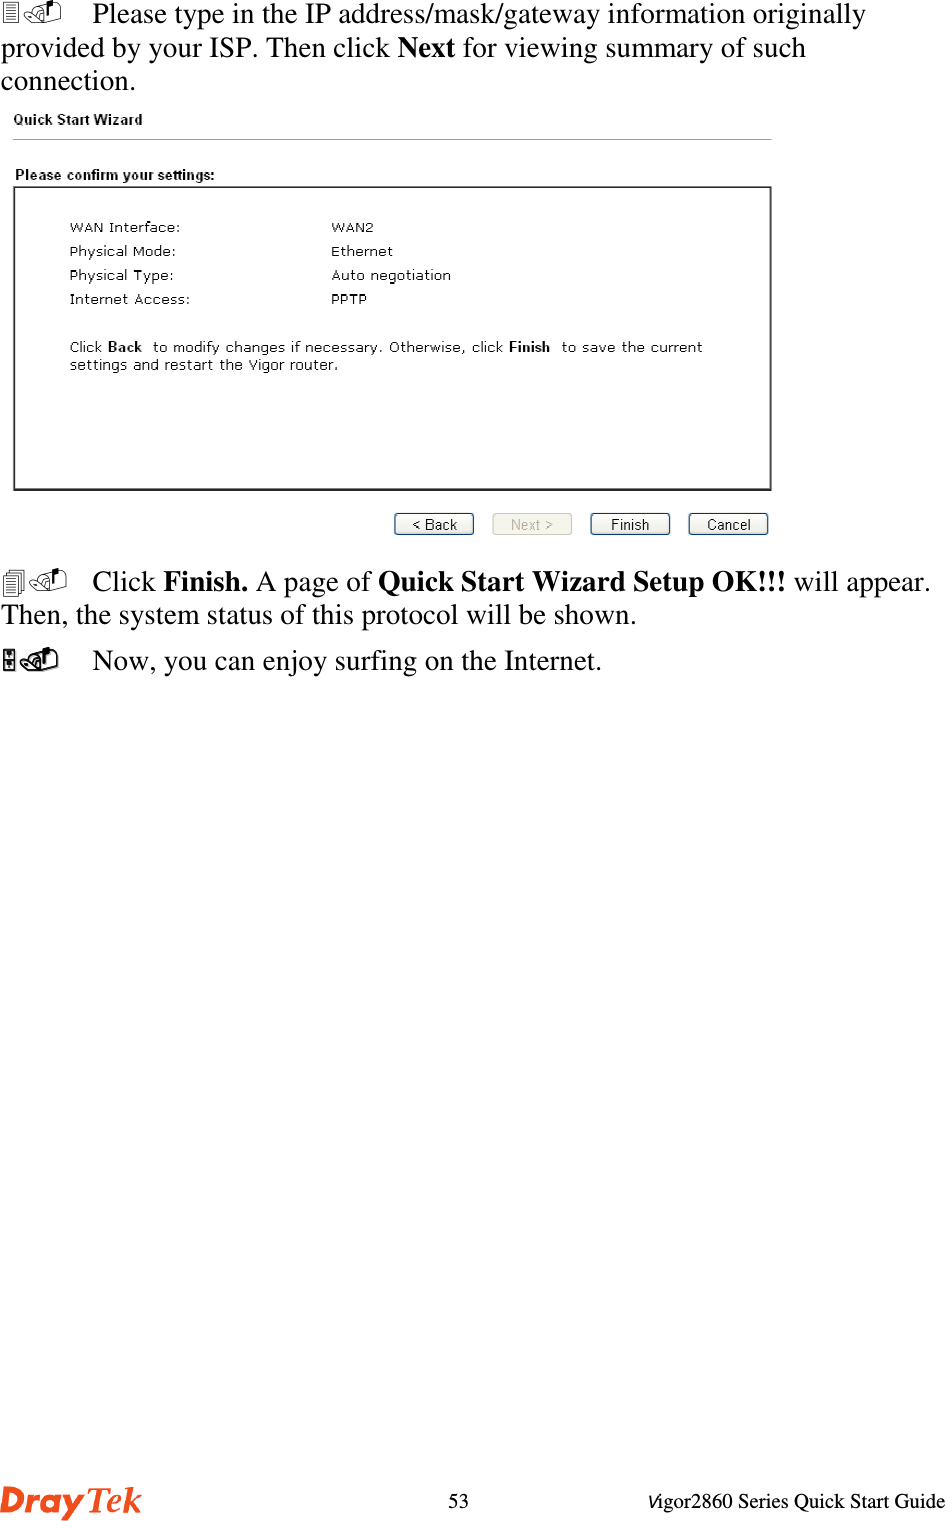 Vigor2860 Series Quick Start Guide53  Please type in the IP address/mask/gateway information originallyprovided by your ISP. Then click Next for viewing summary of suchconnection. Click Finish. A page of Quick Start Wizard Setup OK!!! will appear.Then, the system status of this protocol will be shown.  Now, you can enjoy surfing on the Internet.